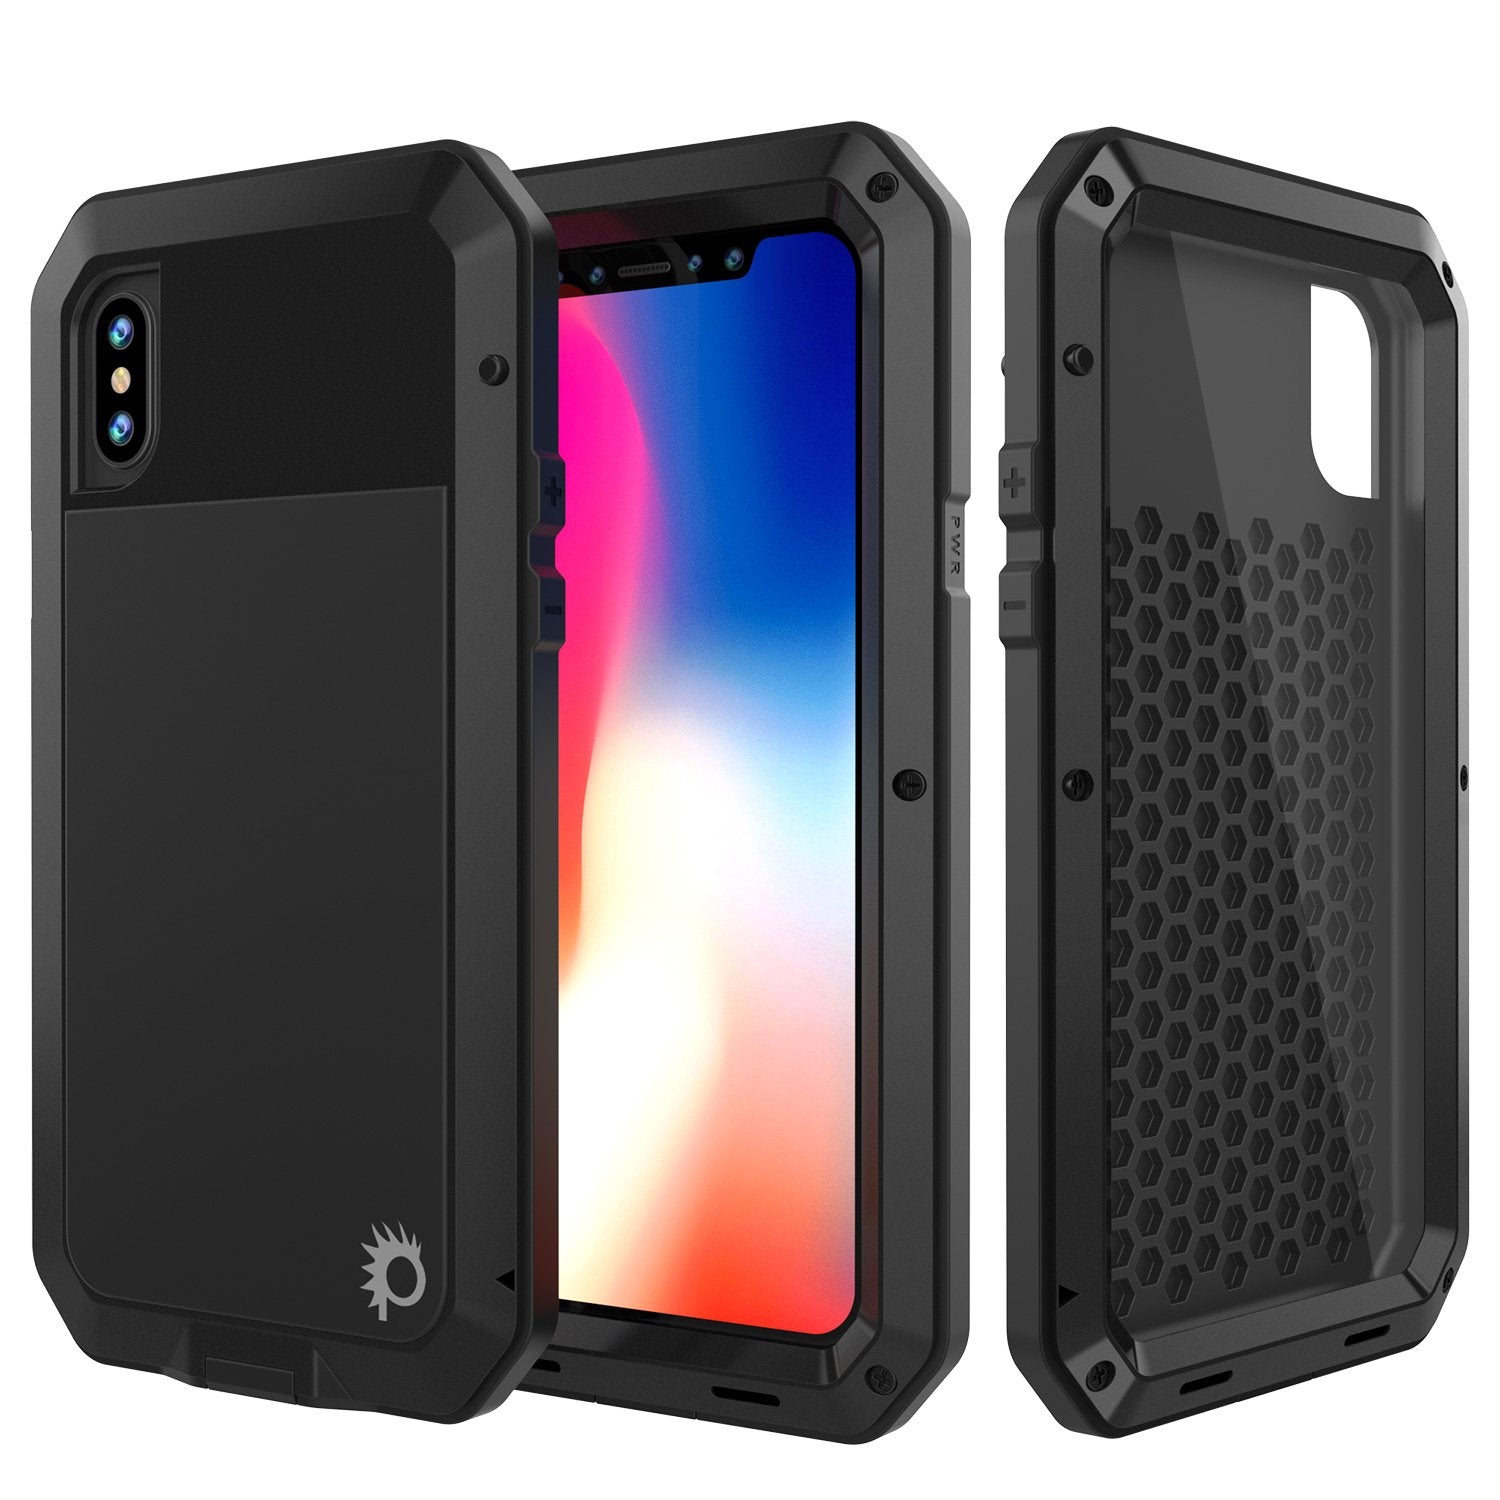 iPhone XS Max Metal Case, Heavy Duty Military Grade Armor Cover